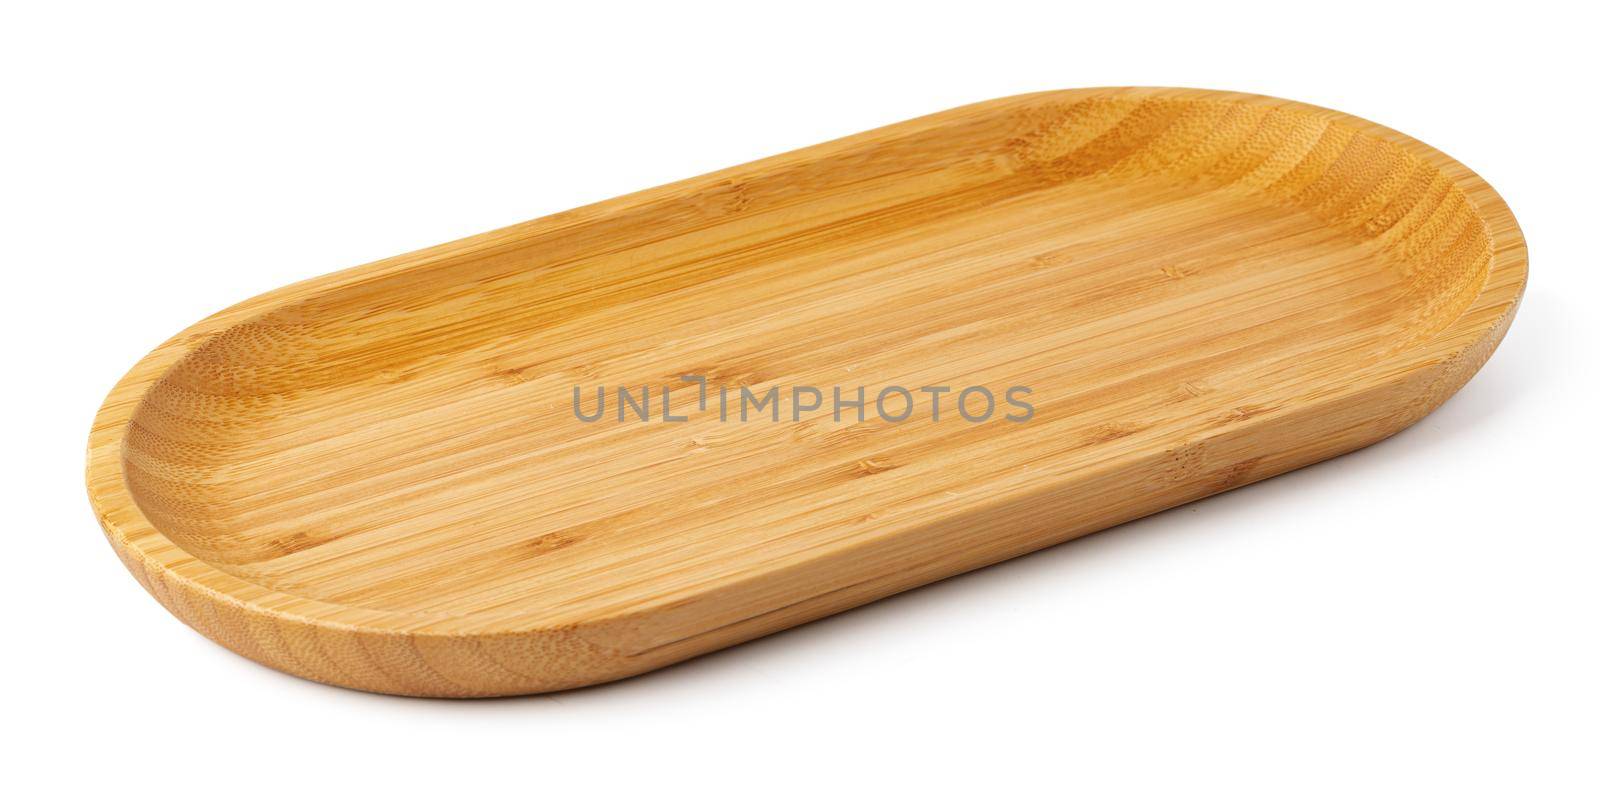 Wooden plate isolated on white background, close up by Fabrikasimf